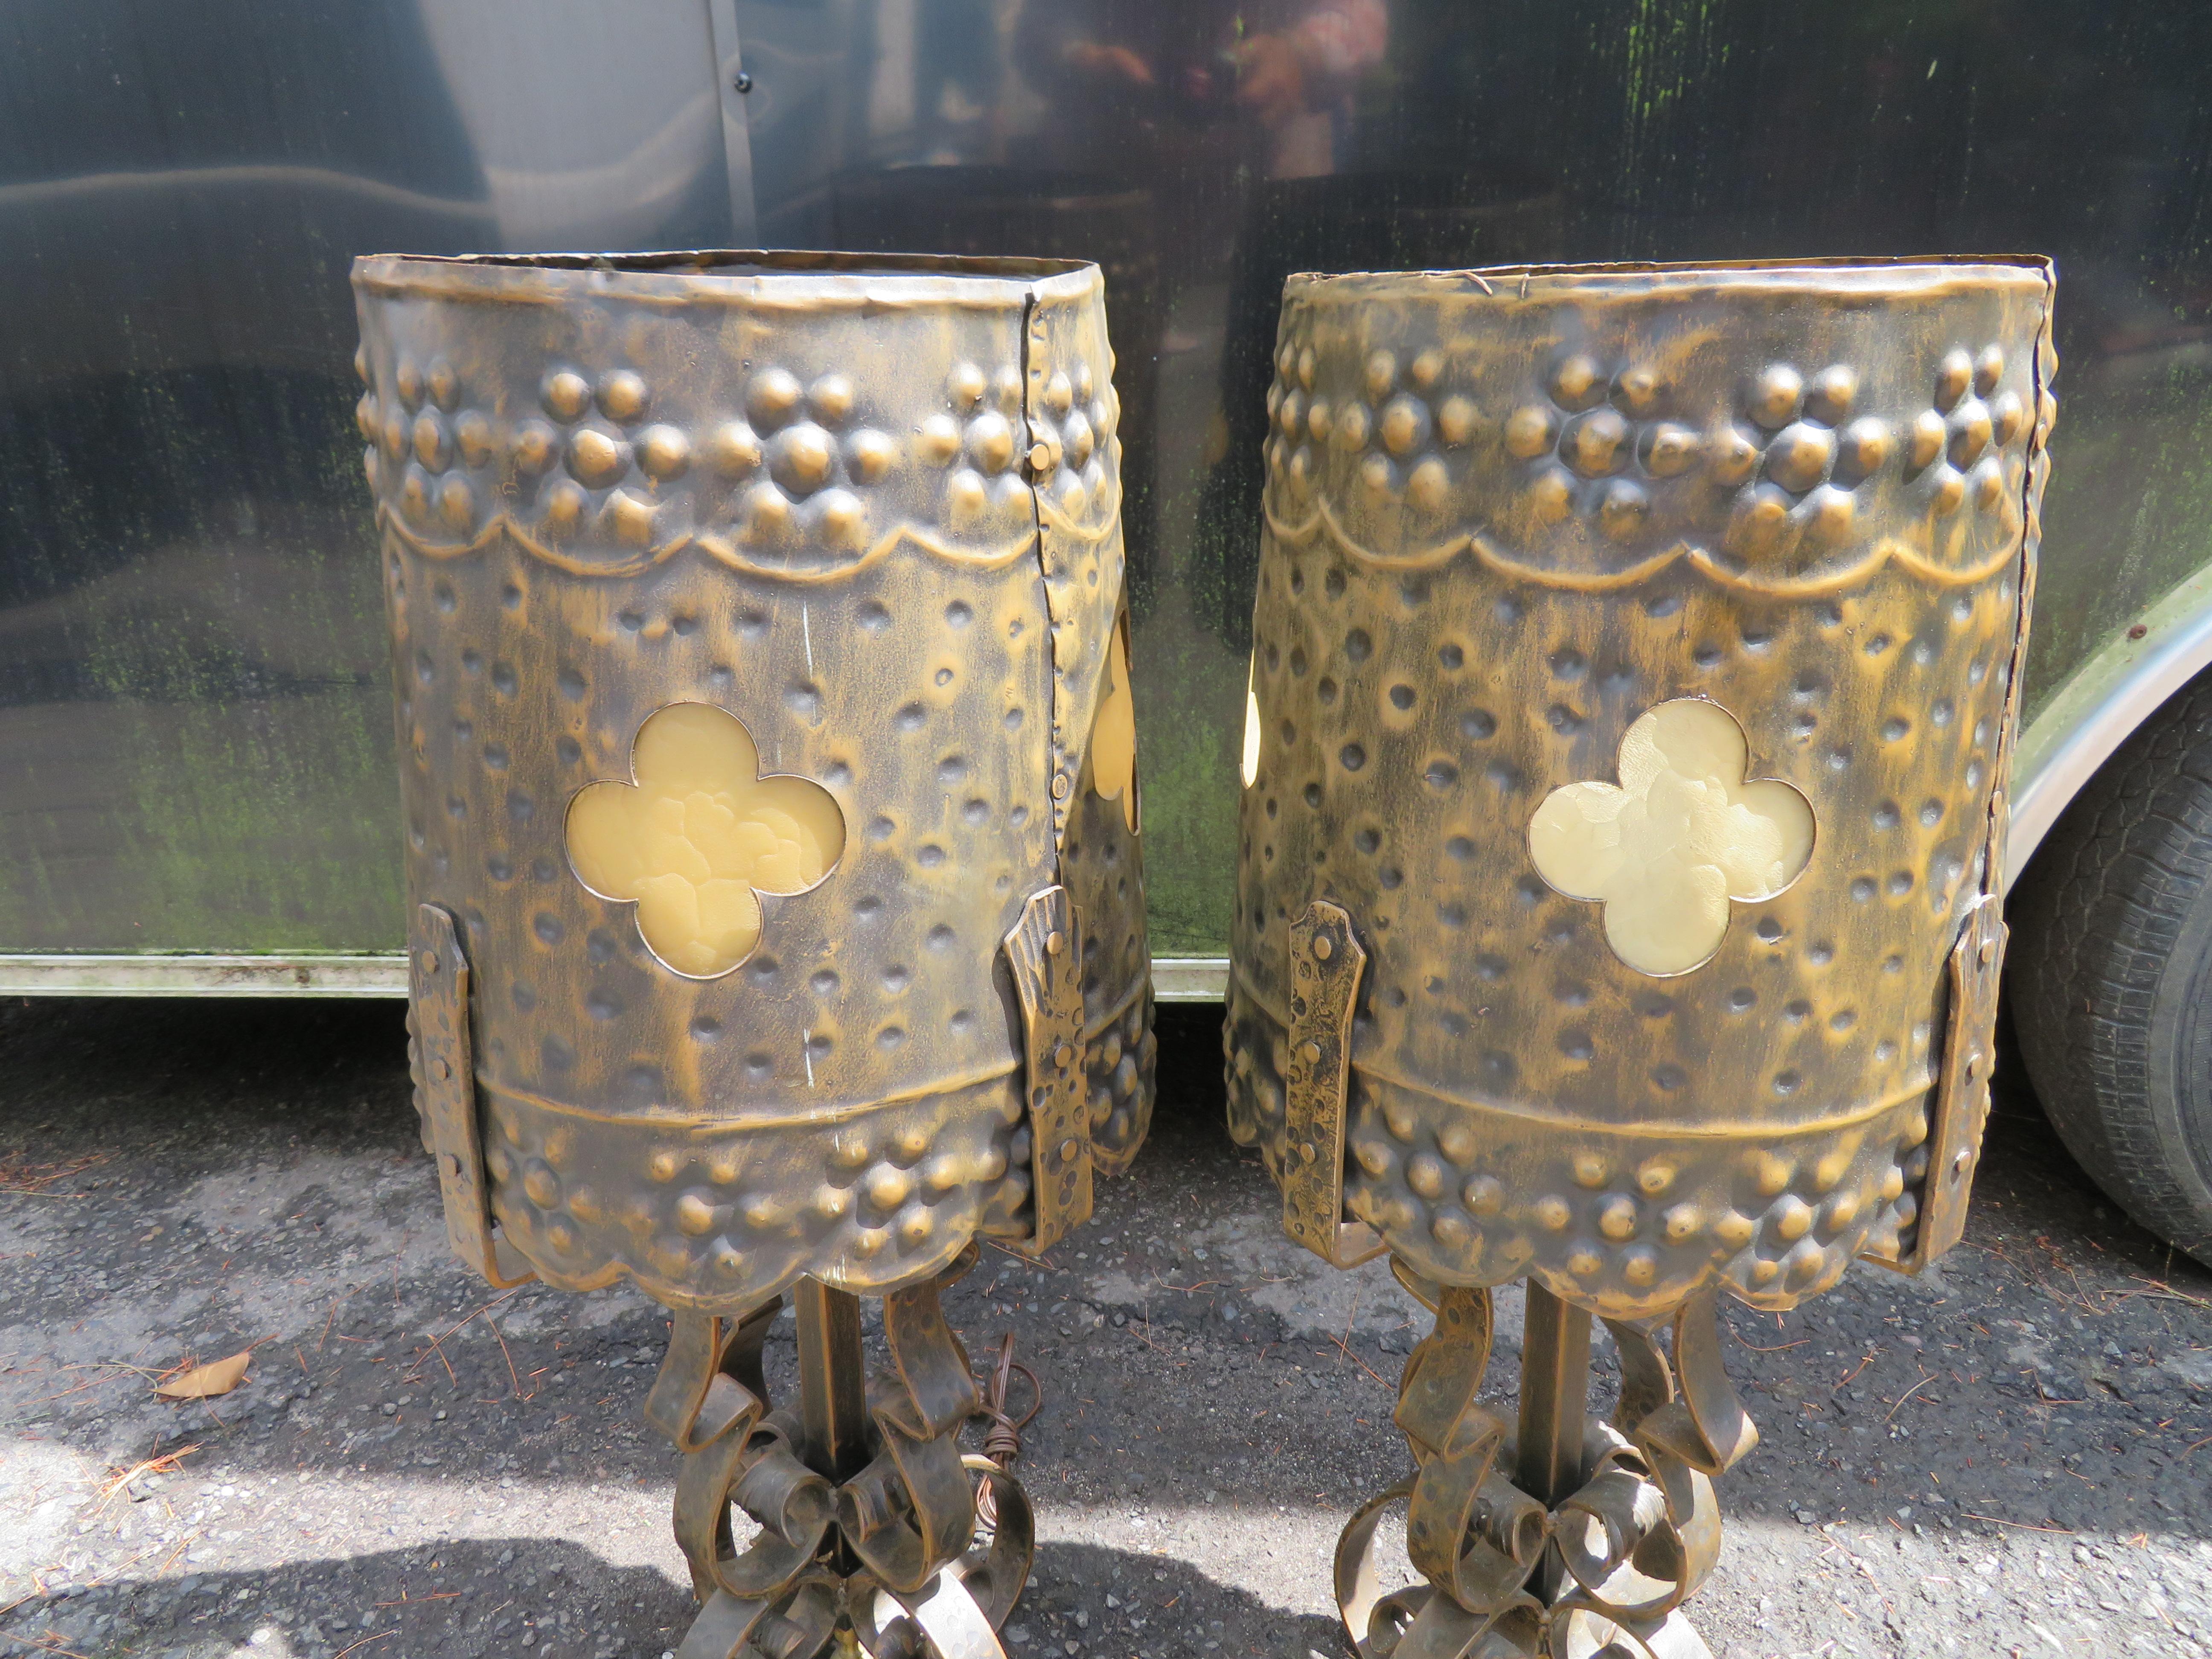 Gothic Revival Monumental Brutalist Hammered Tudor Gothic Scroll Lamps Mid-Century Modern For Sale